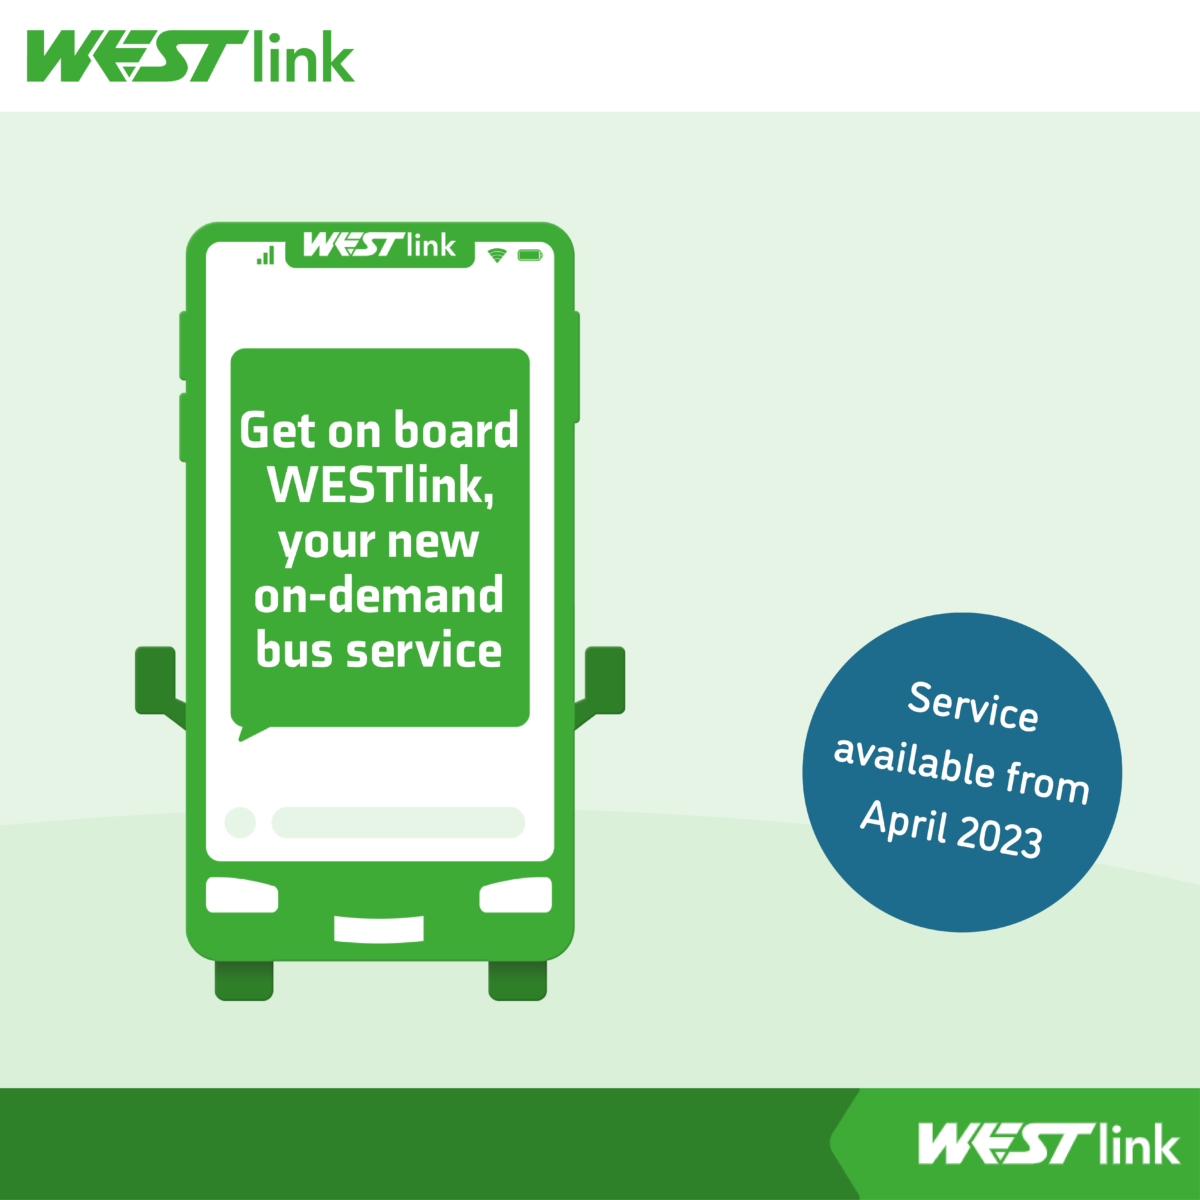 Get on board WESTlink, your new on-demand bus service available from April 2023.